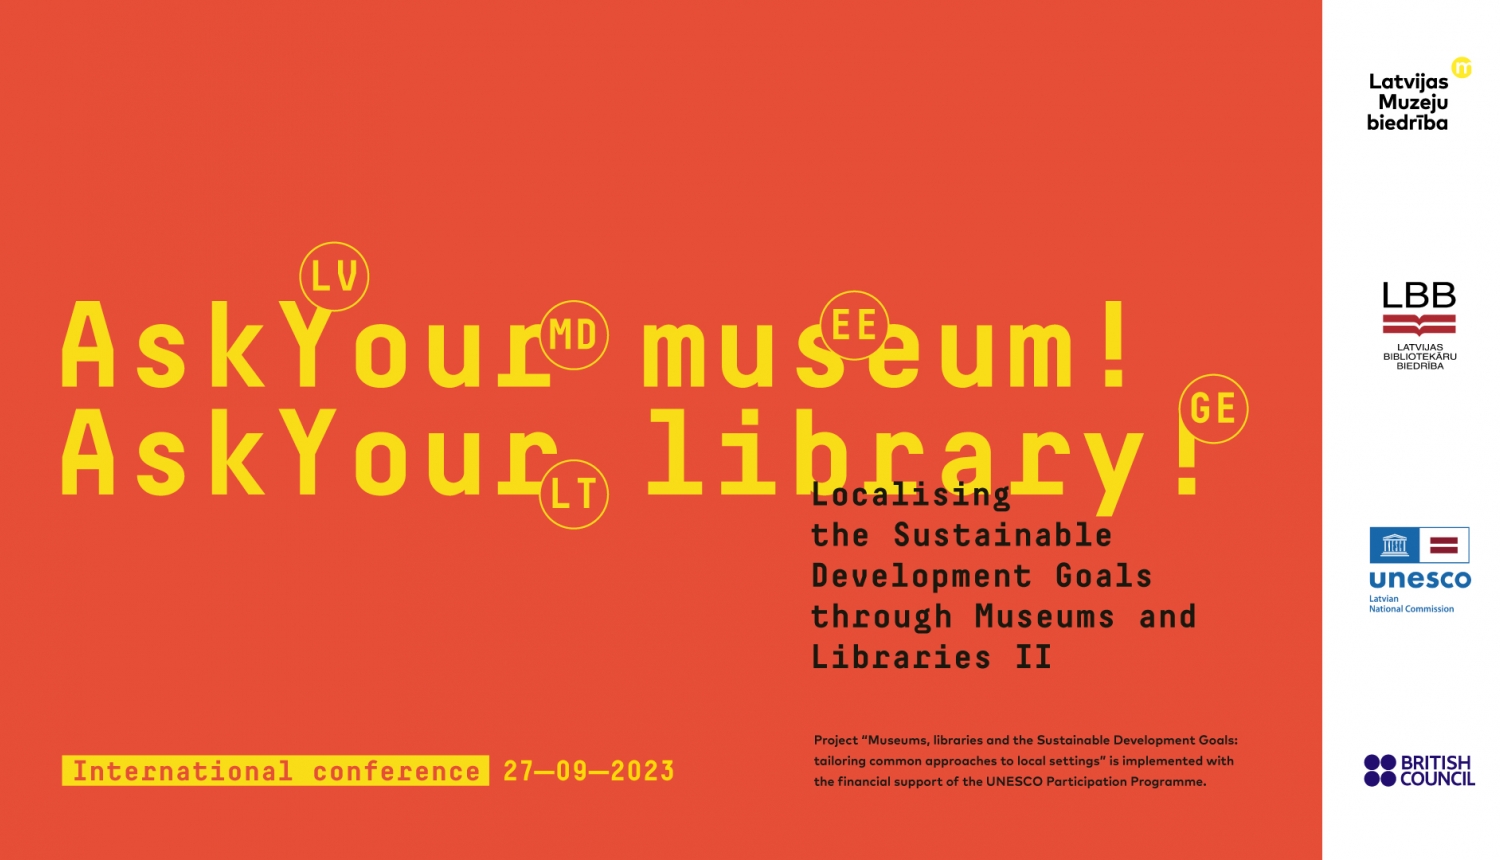 Conference "Localising the Sustainable Development Goals through Museums and Libraries II" visual material